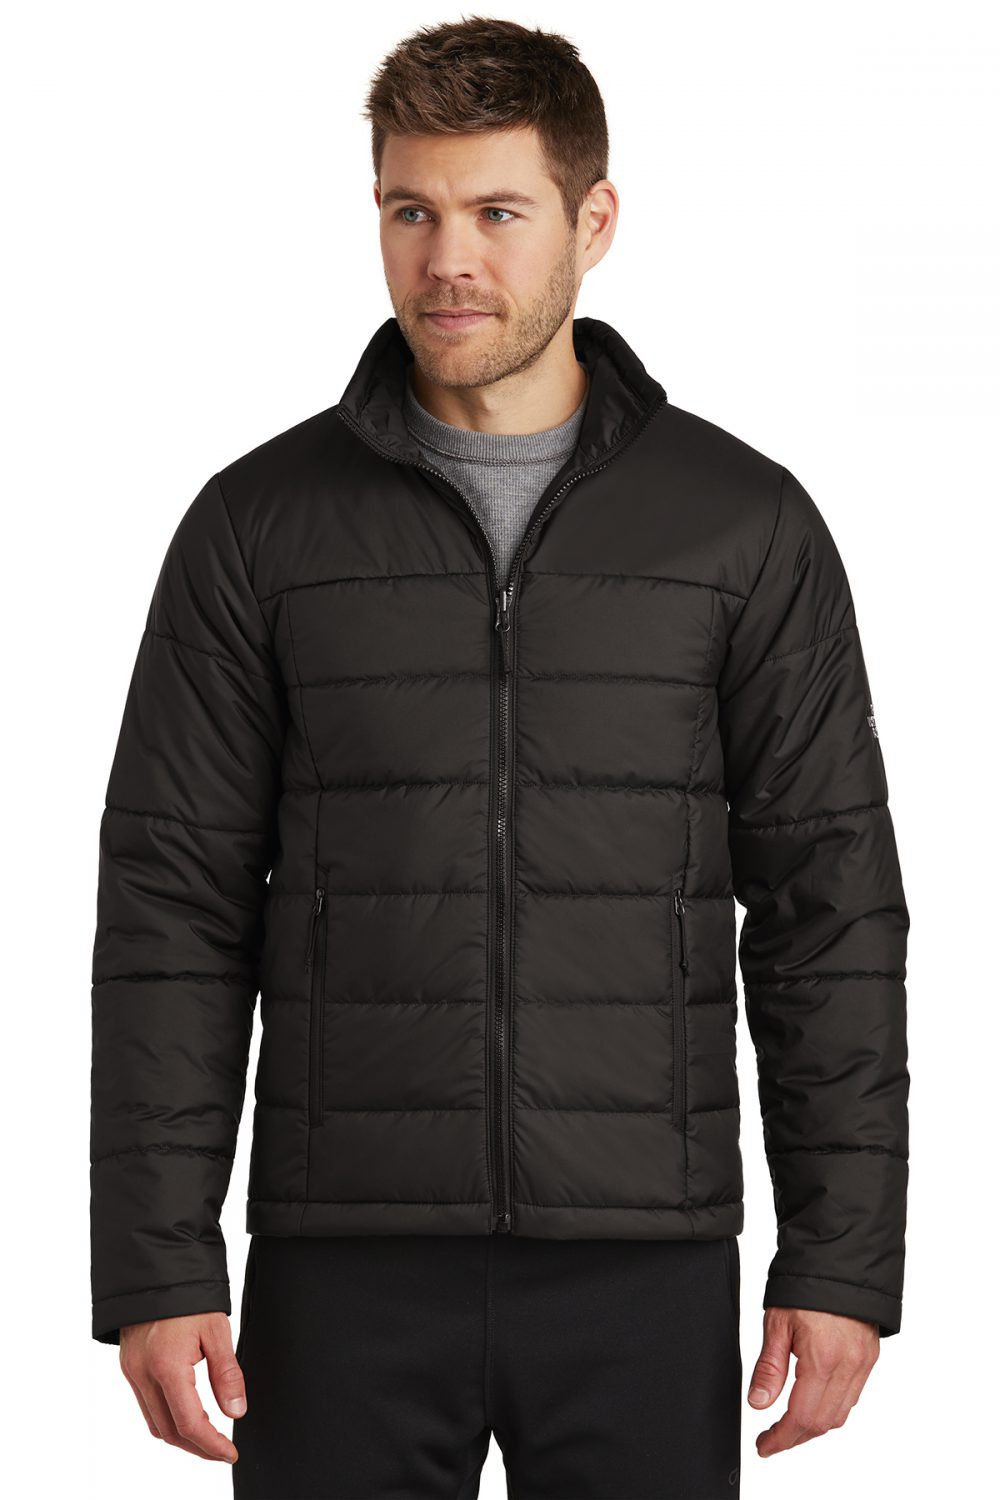 The North Face ® Nf0a3vhr Traverse Triclimate ® 3-in-1 Jacket size M